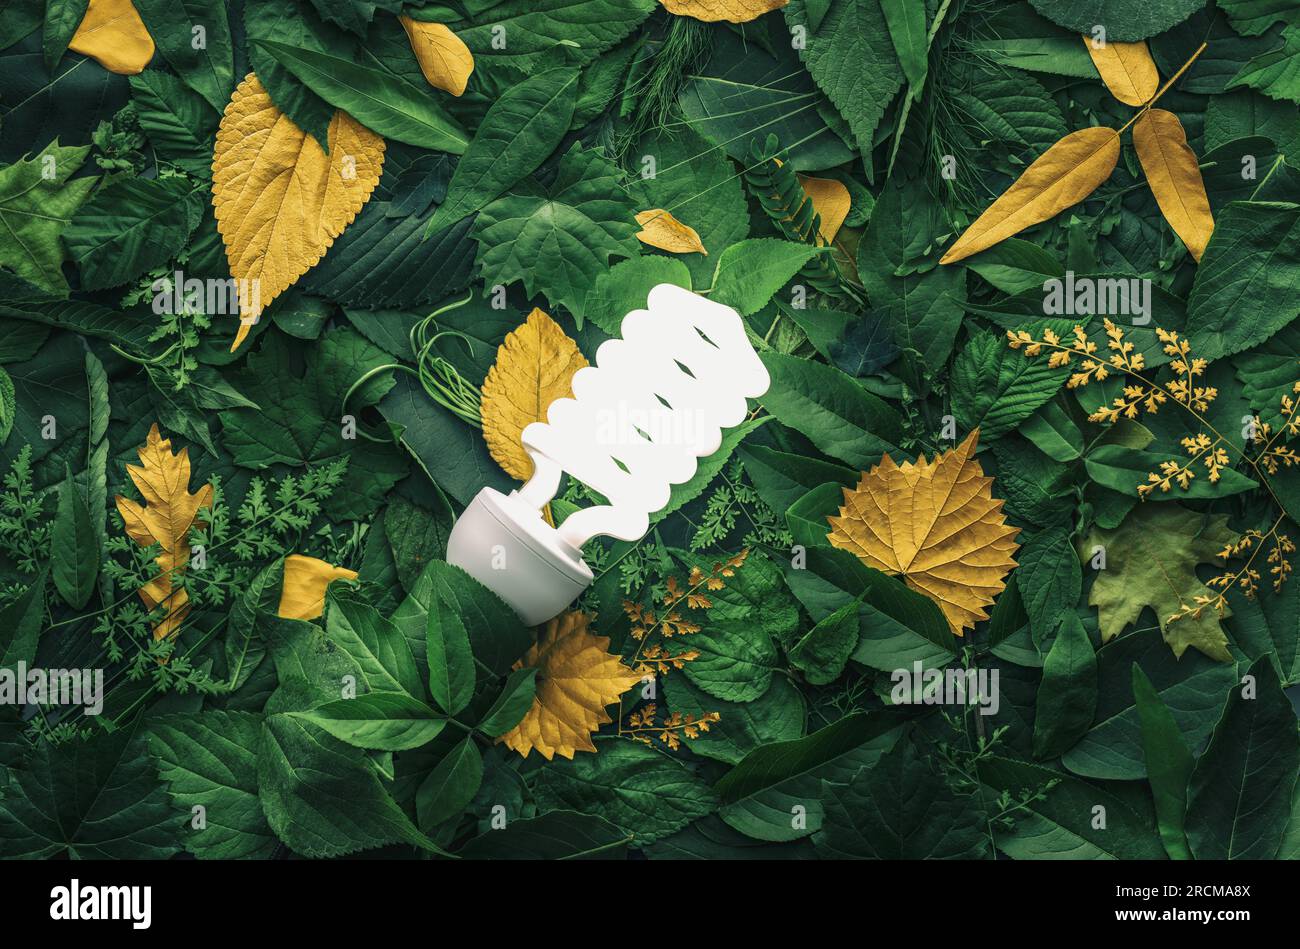 Vibrant green foliage with gold leaves lit by energy efficient lightbulb. Concept of environmentally friendly ideas, energy efficiency, or eco friendl Stock Photo